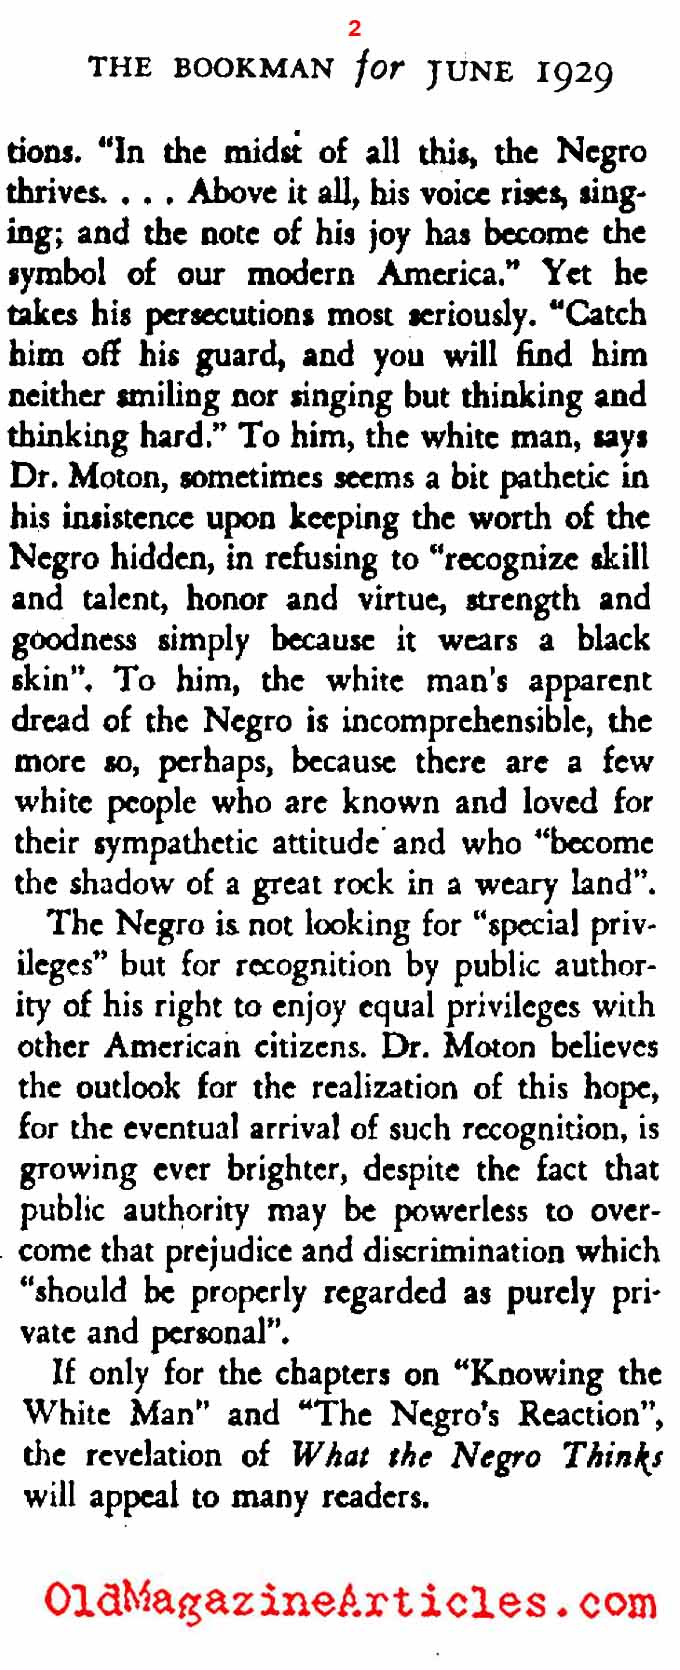 What the Negro Thinks (The Bookman, 1929)